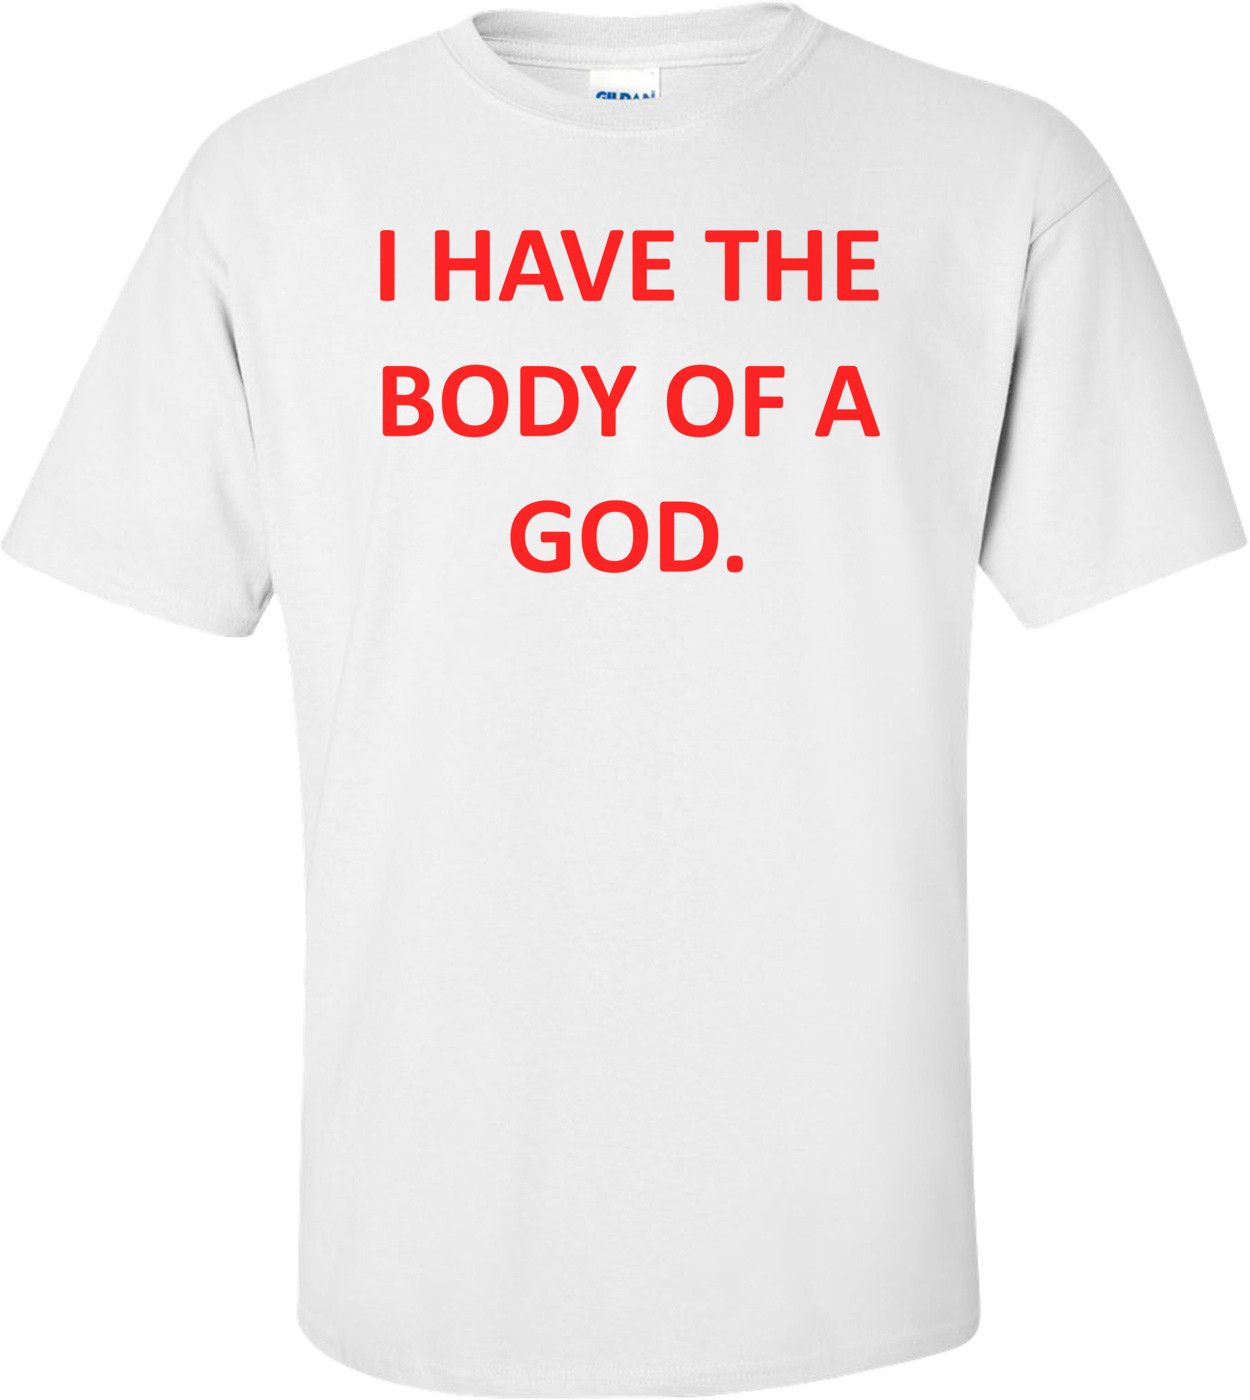 I HAVE THE BODY OF A GOD. Shirt